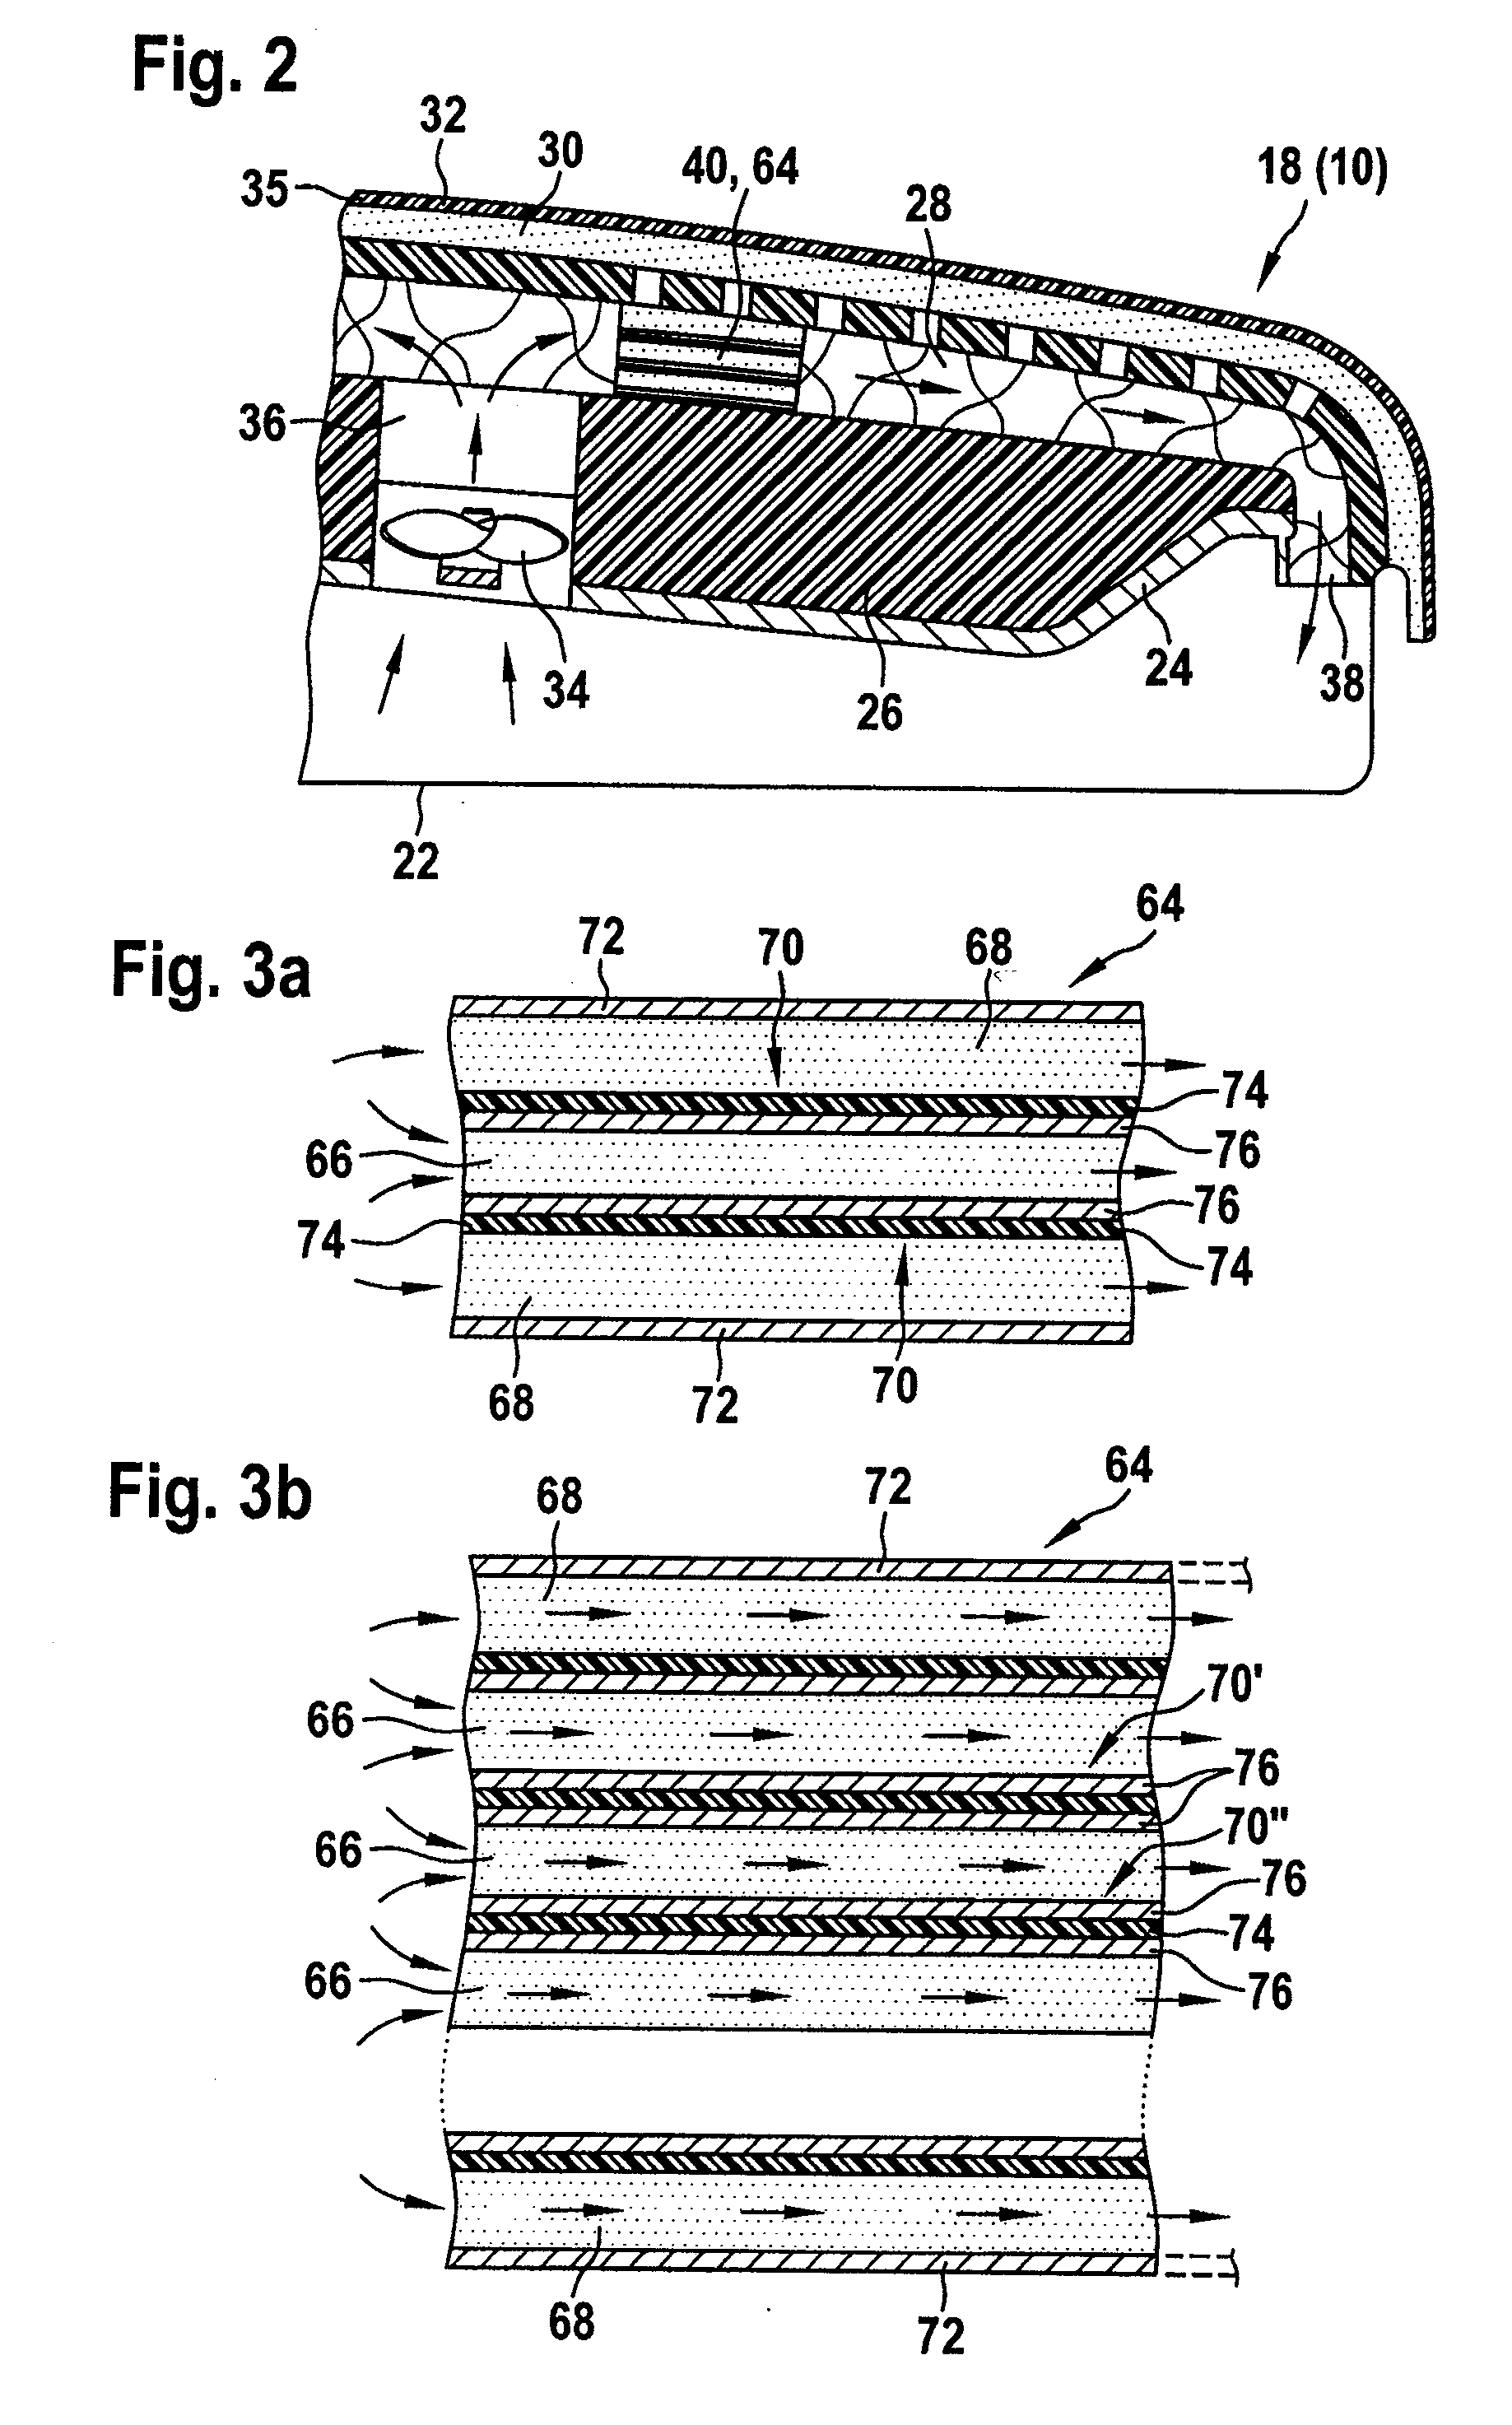 Motor Vehicle Seat Provided With a Ventilation Device